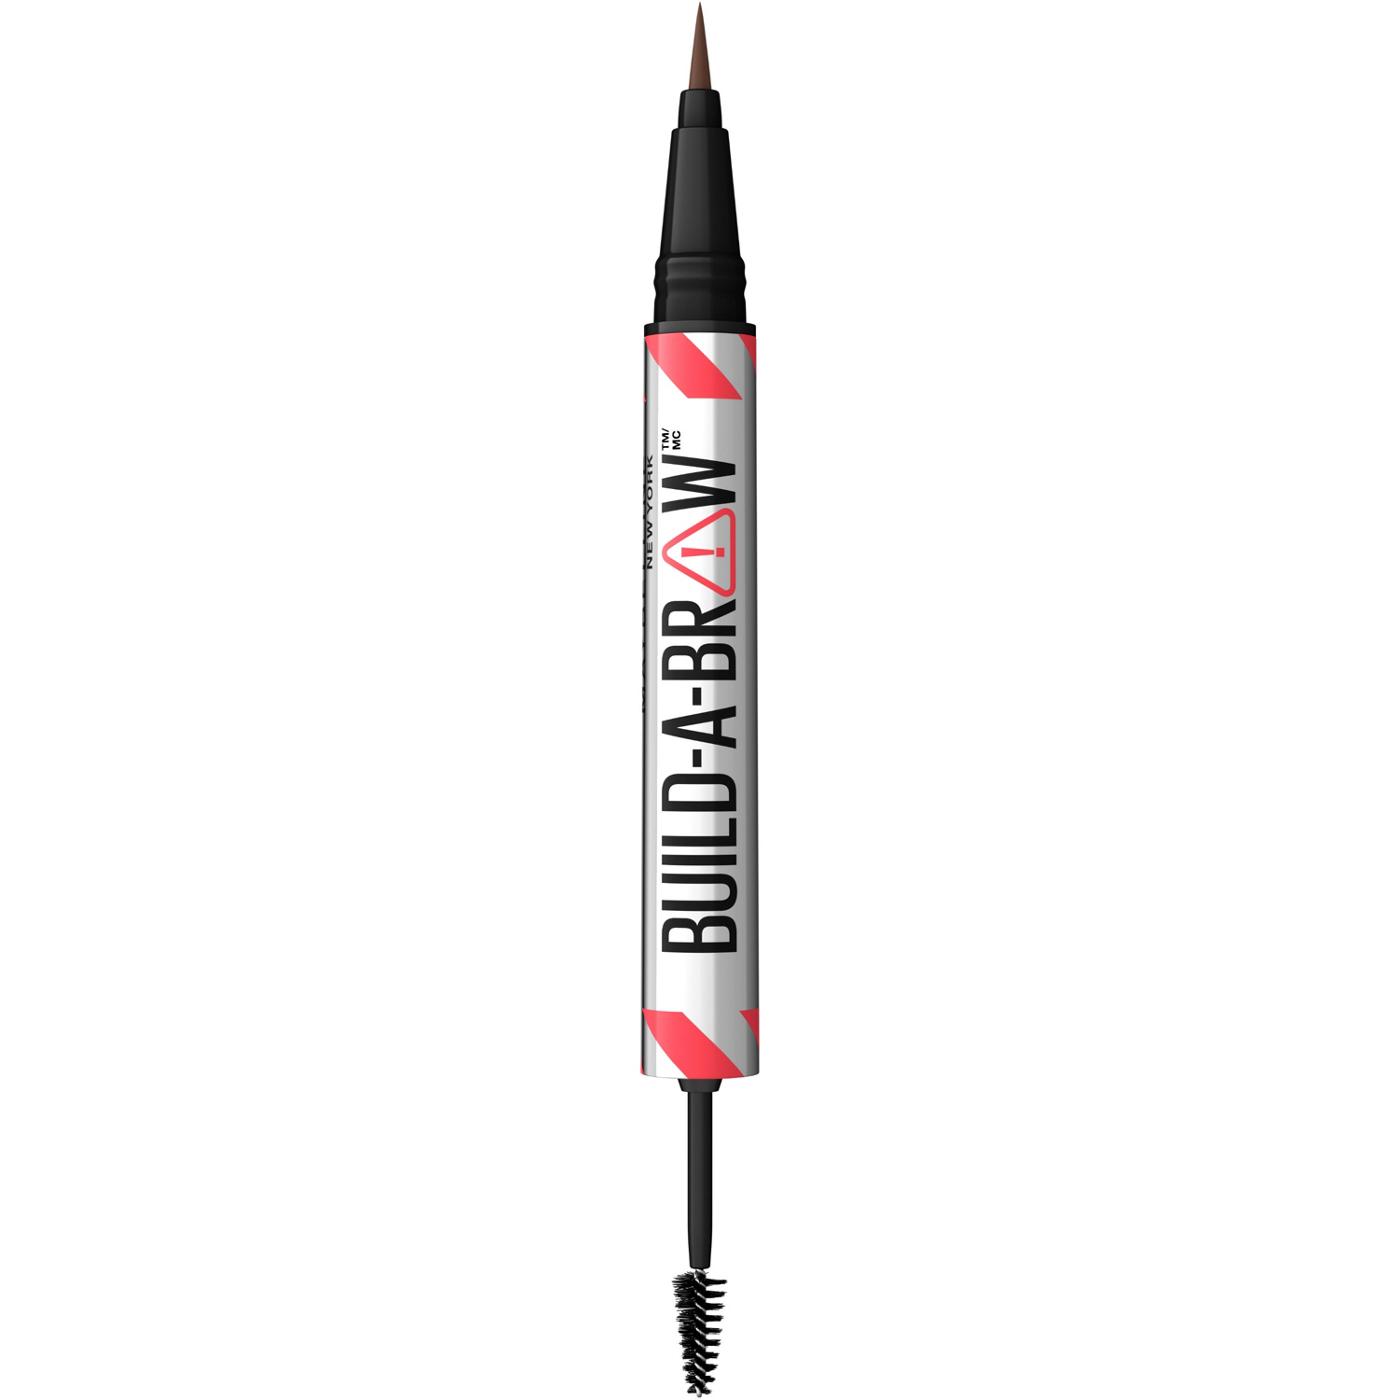 Maybelline Build A Brow 2 In 1 Brow Pen - Medium Brown; image 1 of 16